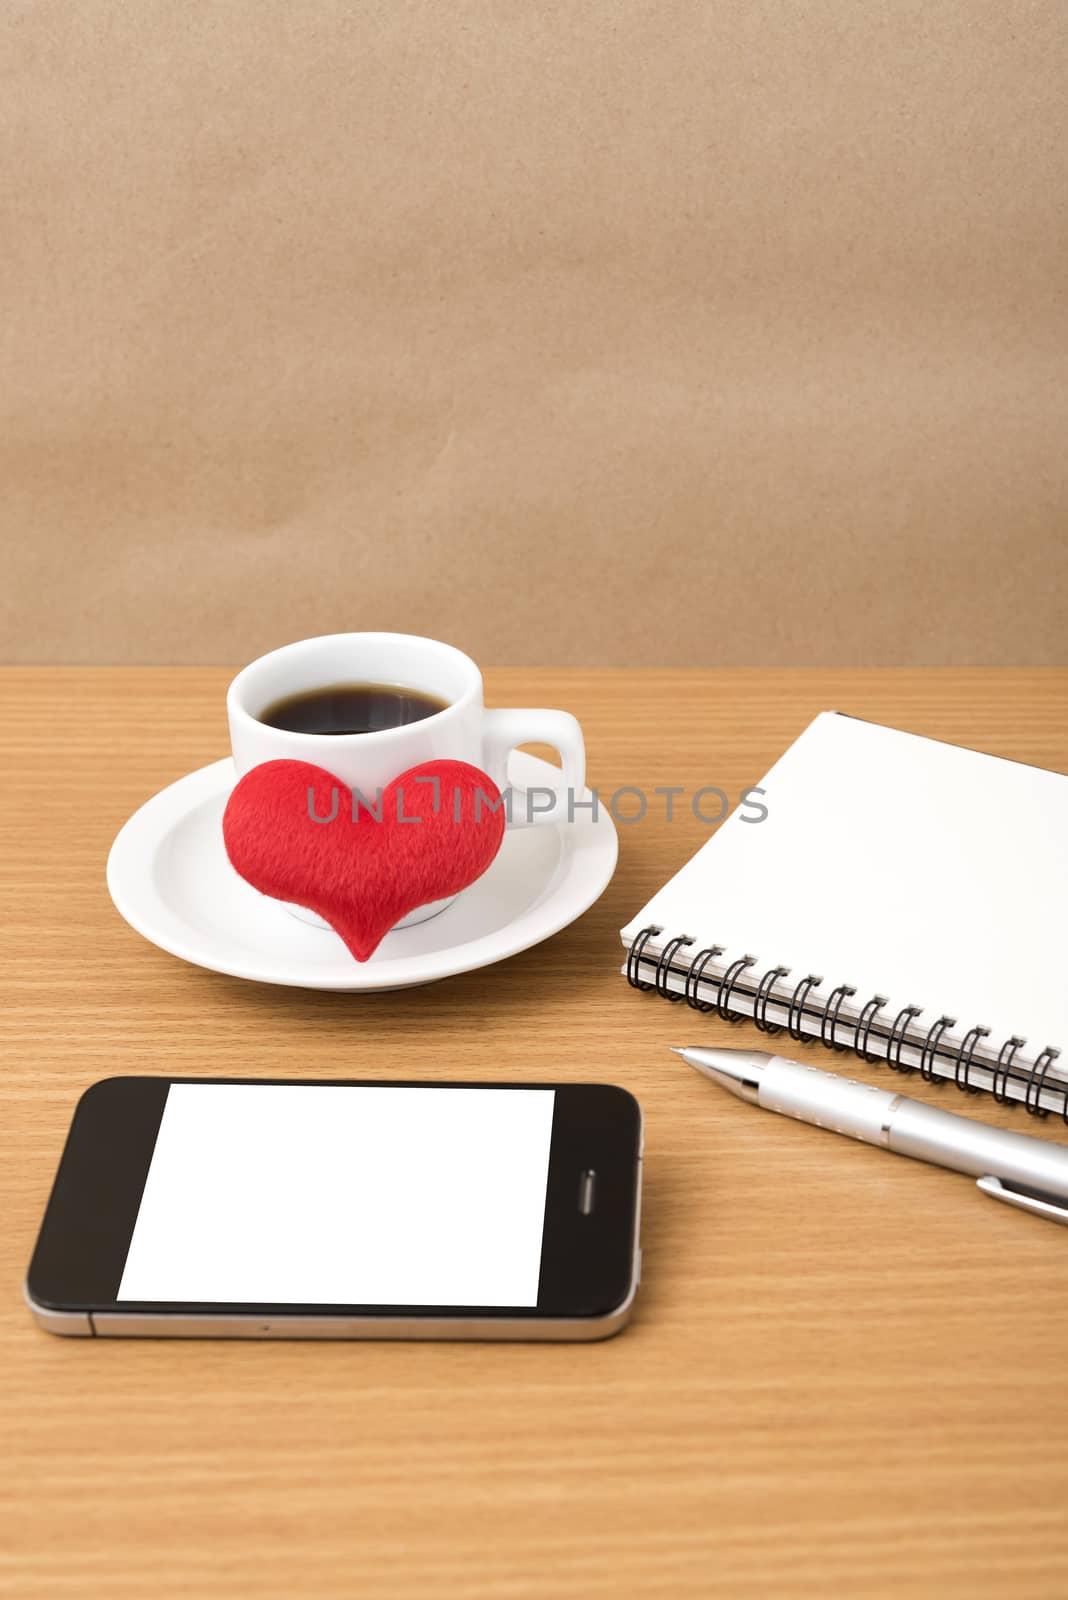 coffee,phone,notepad and heart on wood table background